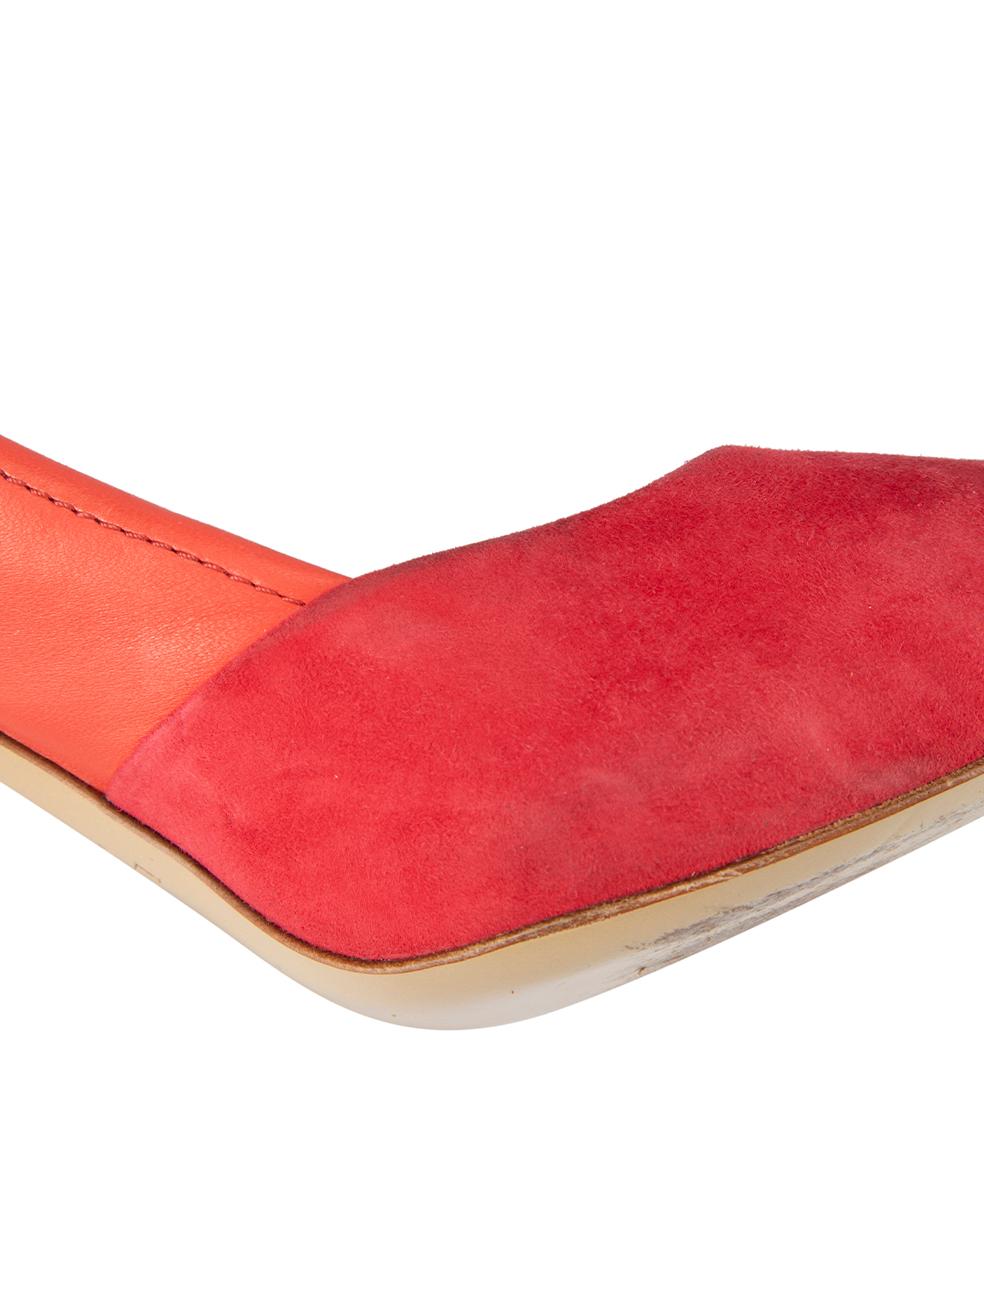 Lanvin Women's Red Suede & Leather Panel Pointed Toe Pumps For Sale 2